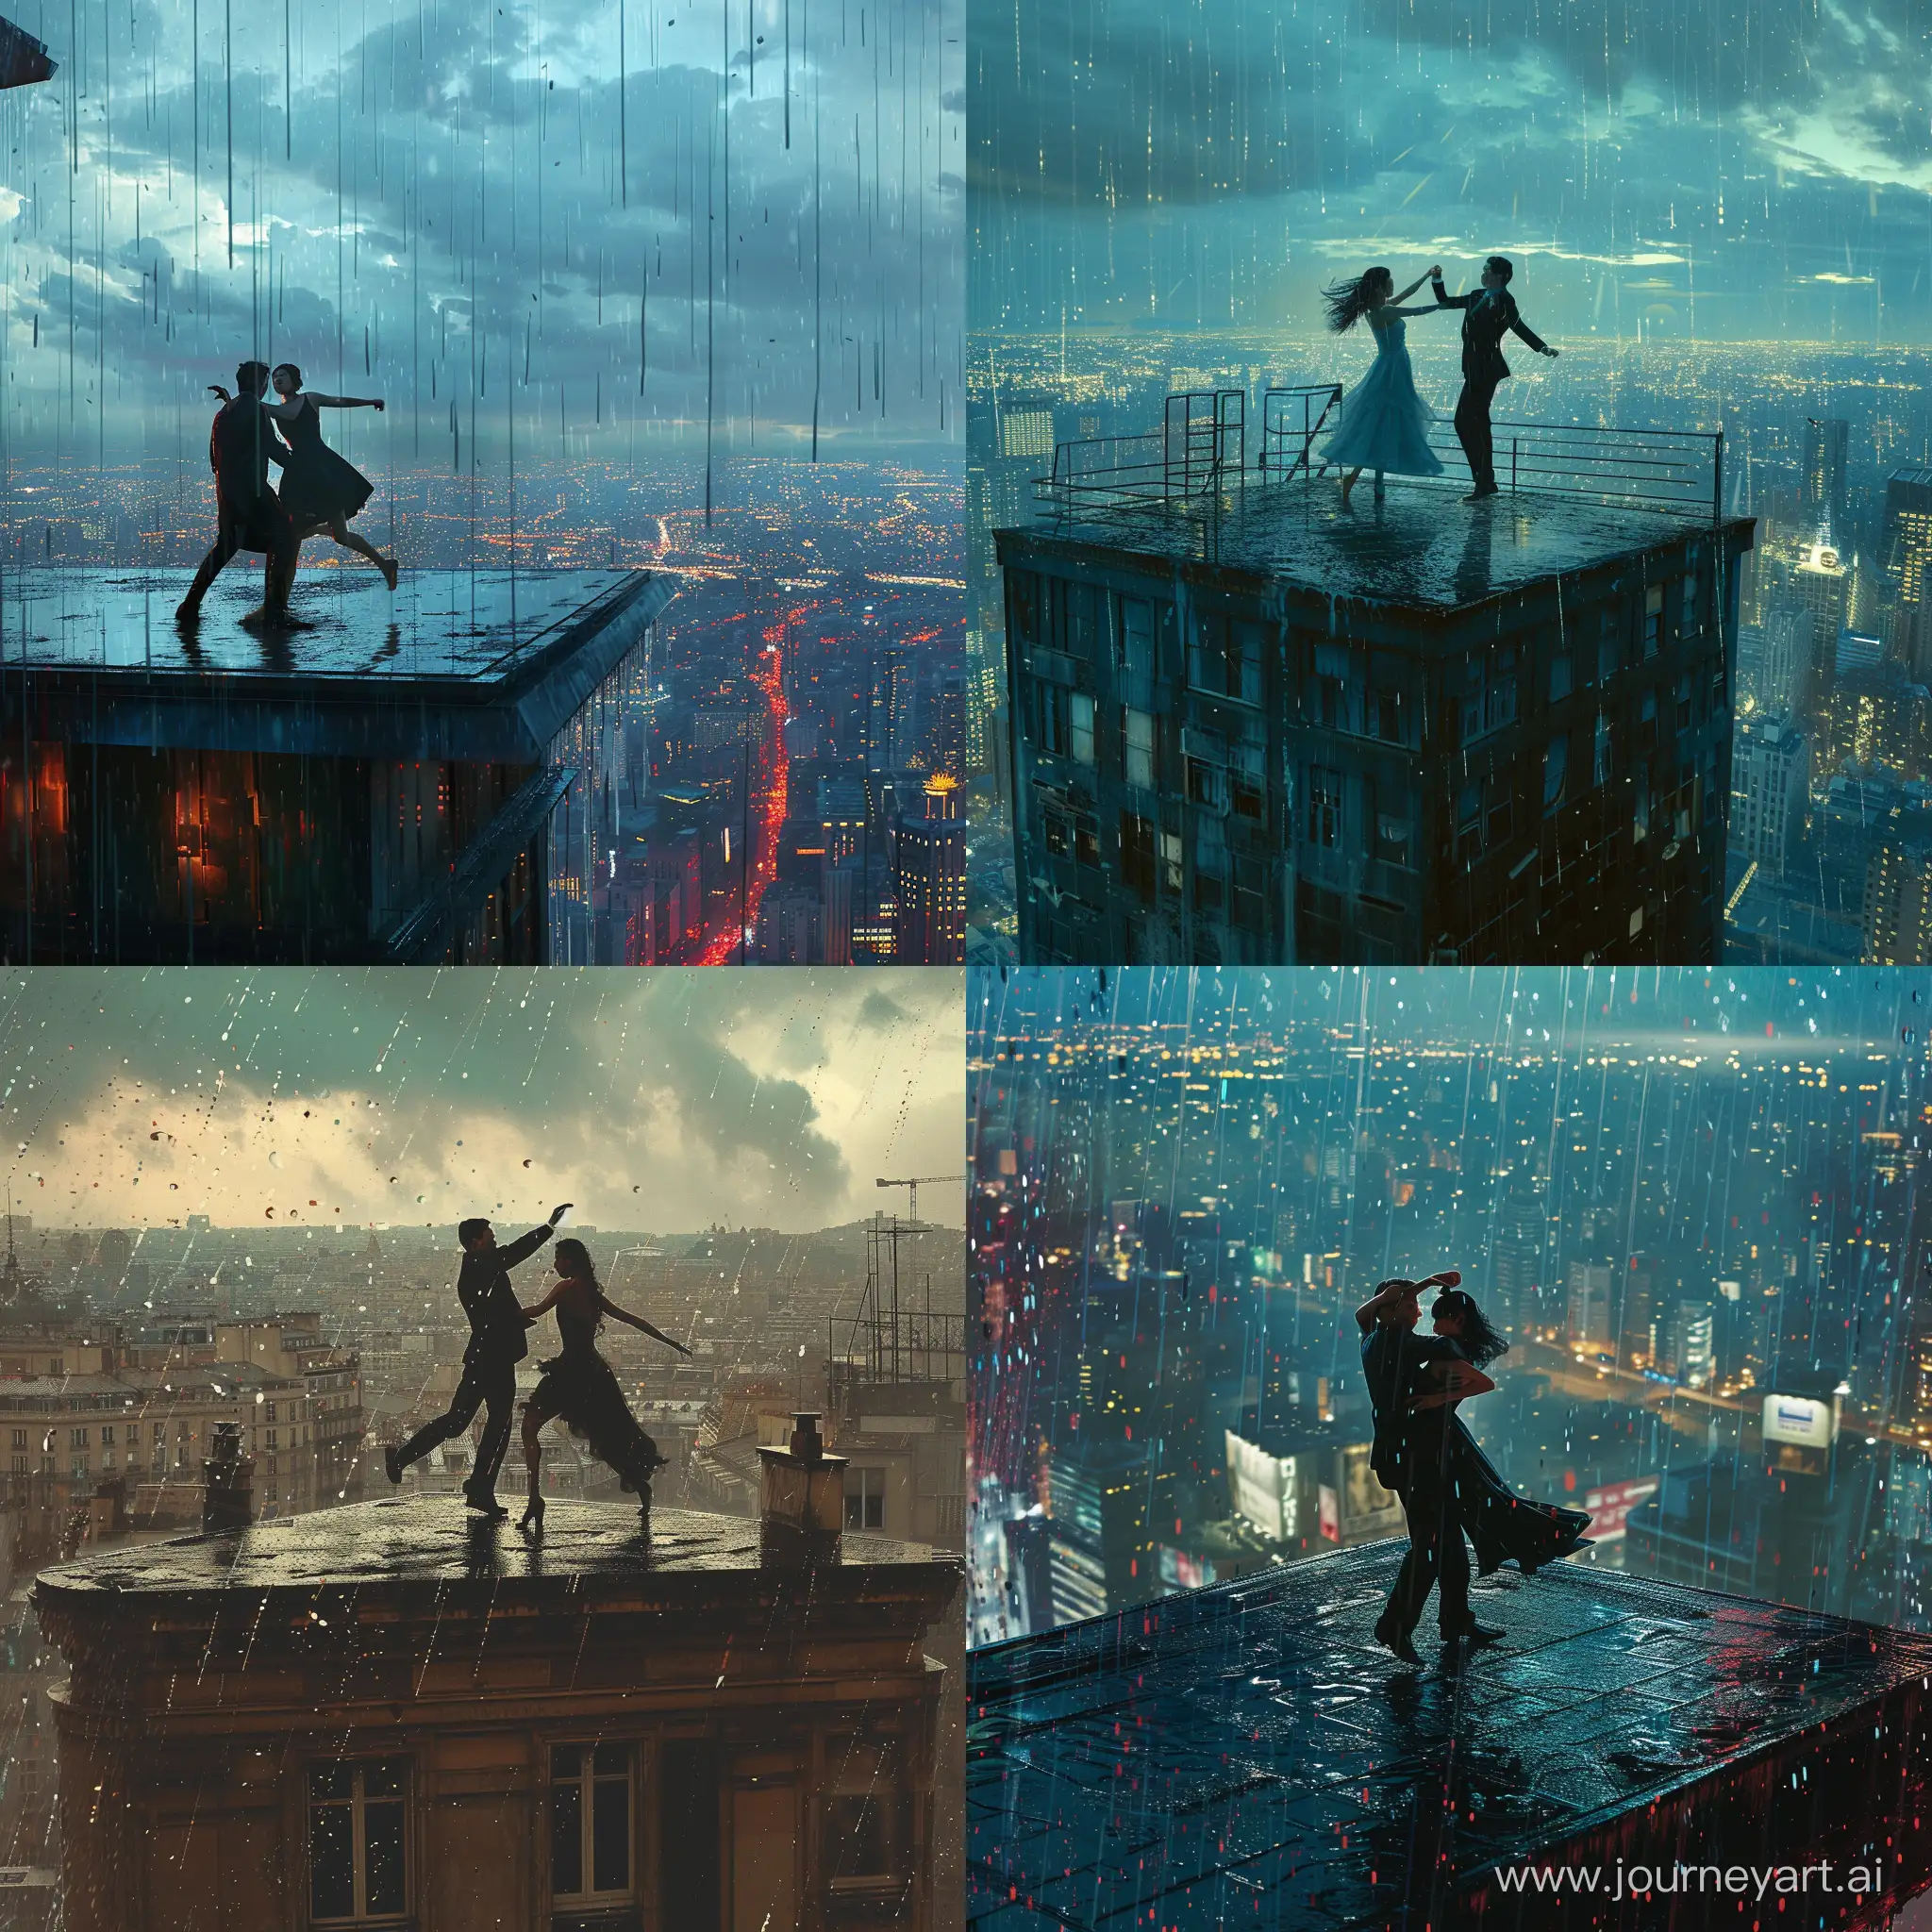 Enchanting-Rainsoaked-Dance-on-City-Rooftop-Unpredictable-Beauty-Amidst-Technological-Chaos